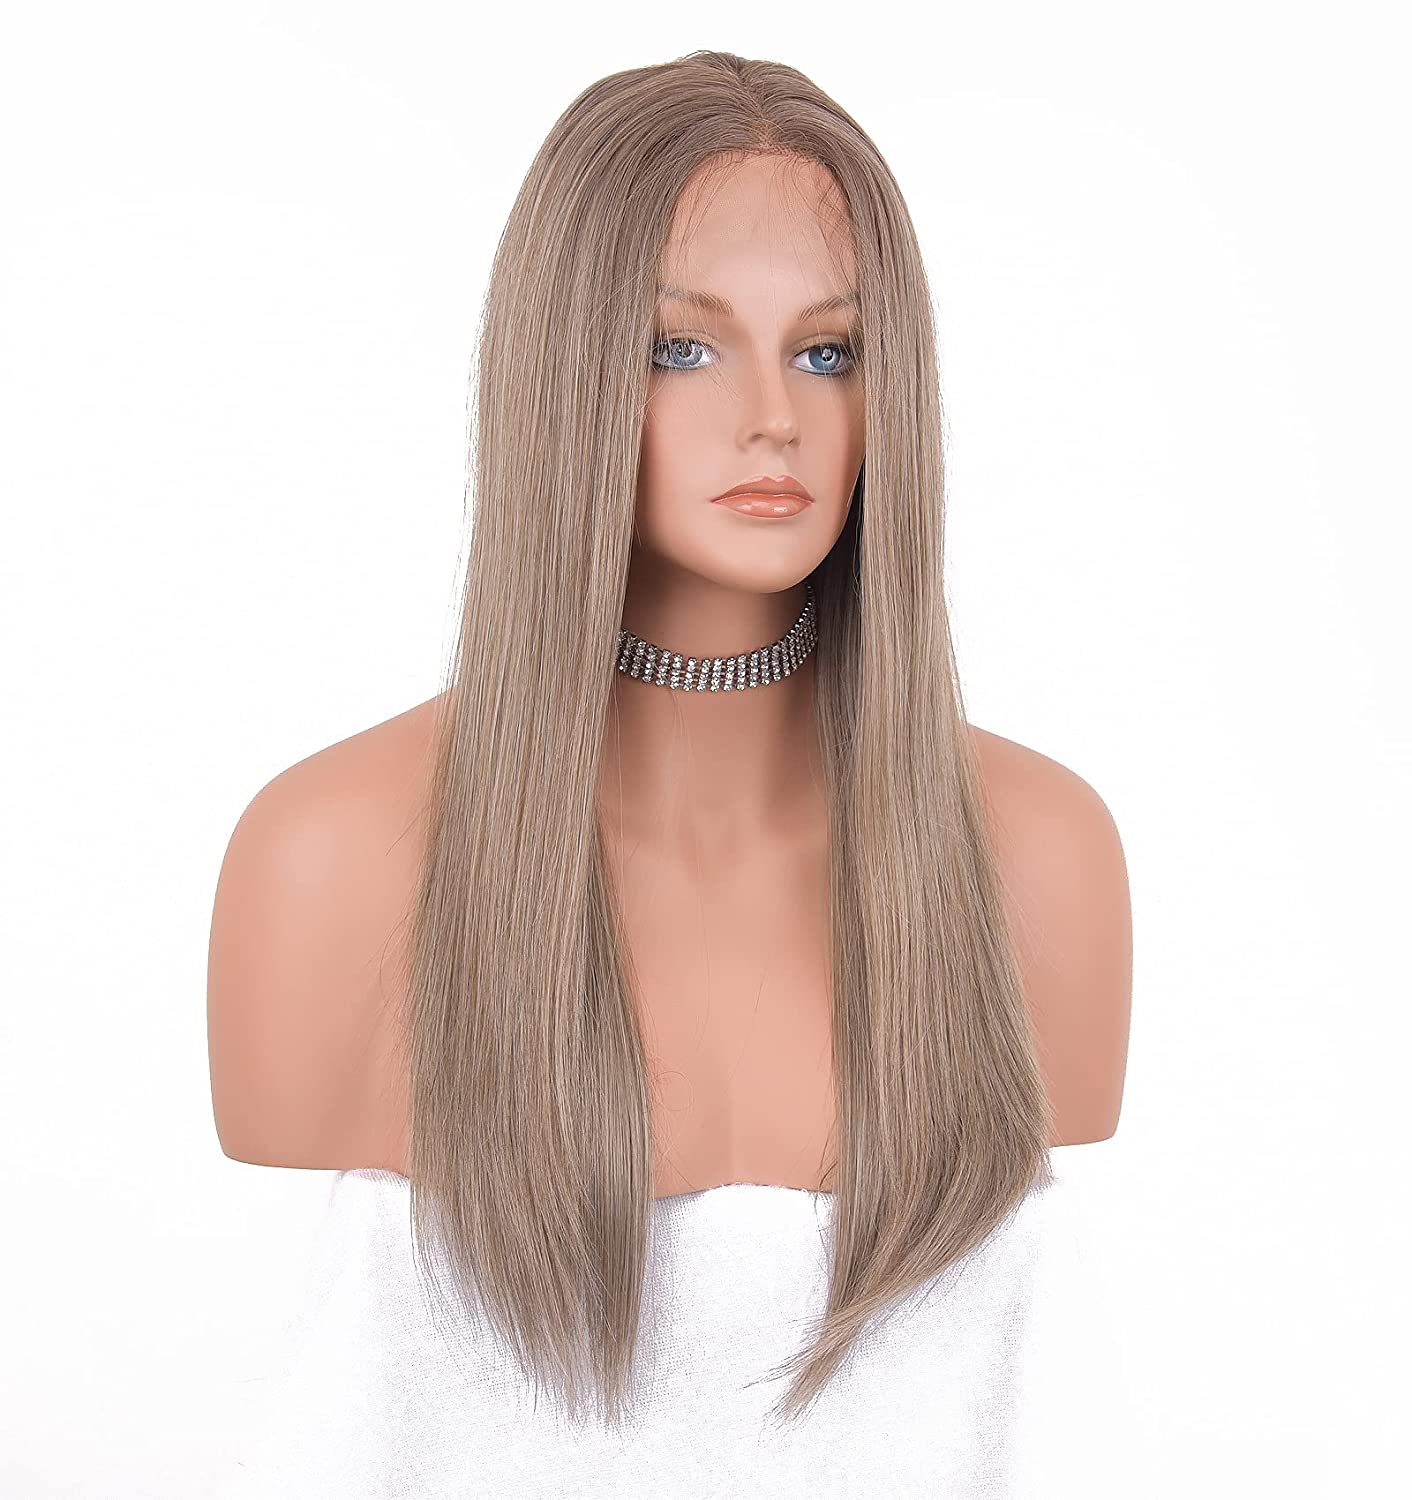 synthetic wigs for women,ombre lace front wig,womens lace front wigs,lace front wigs straight hair wig,brown ombre wig,brown lace front wigs,synthetic wigs,synthetic lace front wigs for women,synthetic lace frontal wig,brown blonde wig,ombre wigs,lace front wigs for women lace synthetic wig,straight wigs for women,ombre hair wig,brown lace wig,lace front wigs synthetic,ombre wig for women,brown hair wigs for women,long brown wig